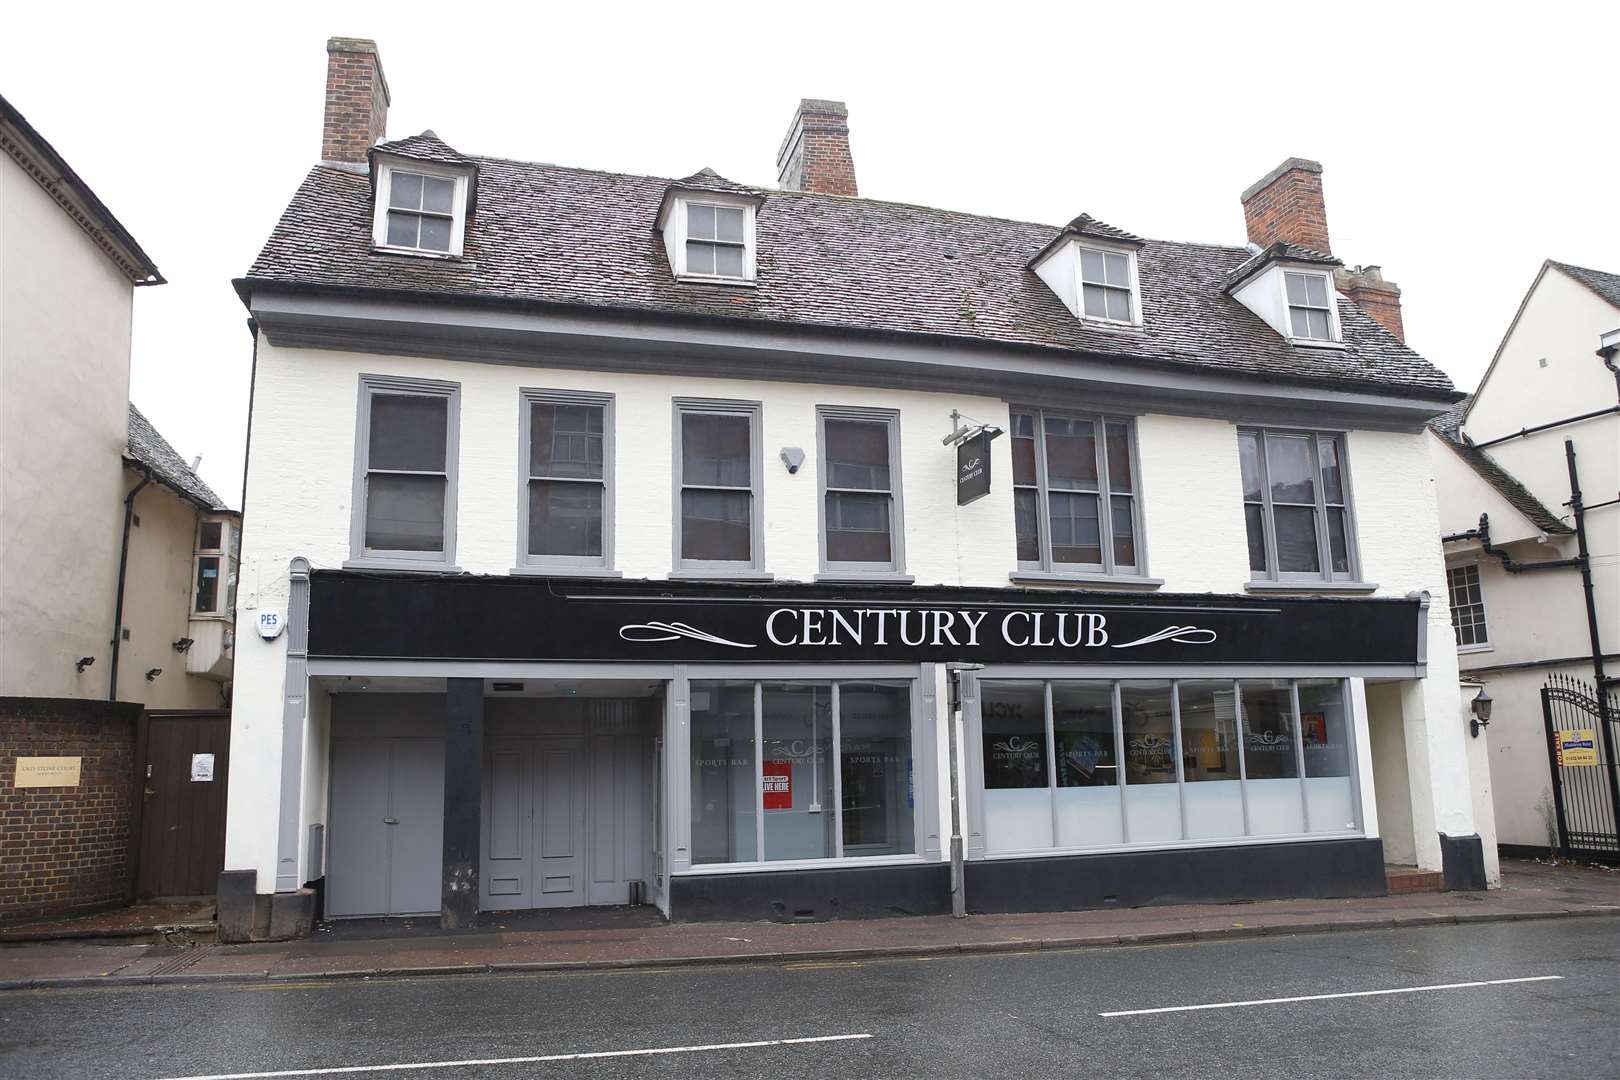 Century Club in Lower Stone Street Picture: Andy Jones